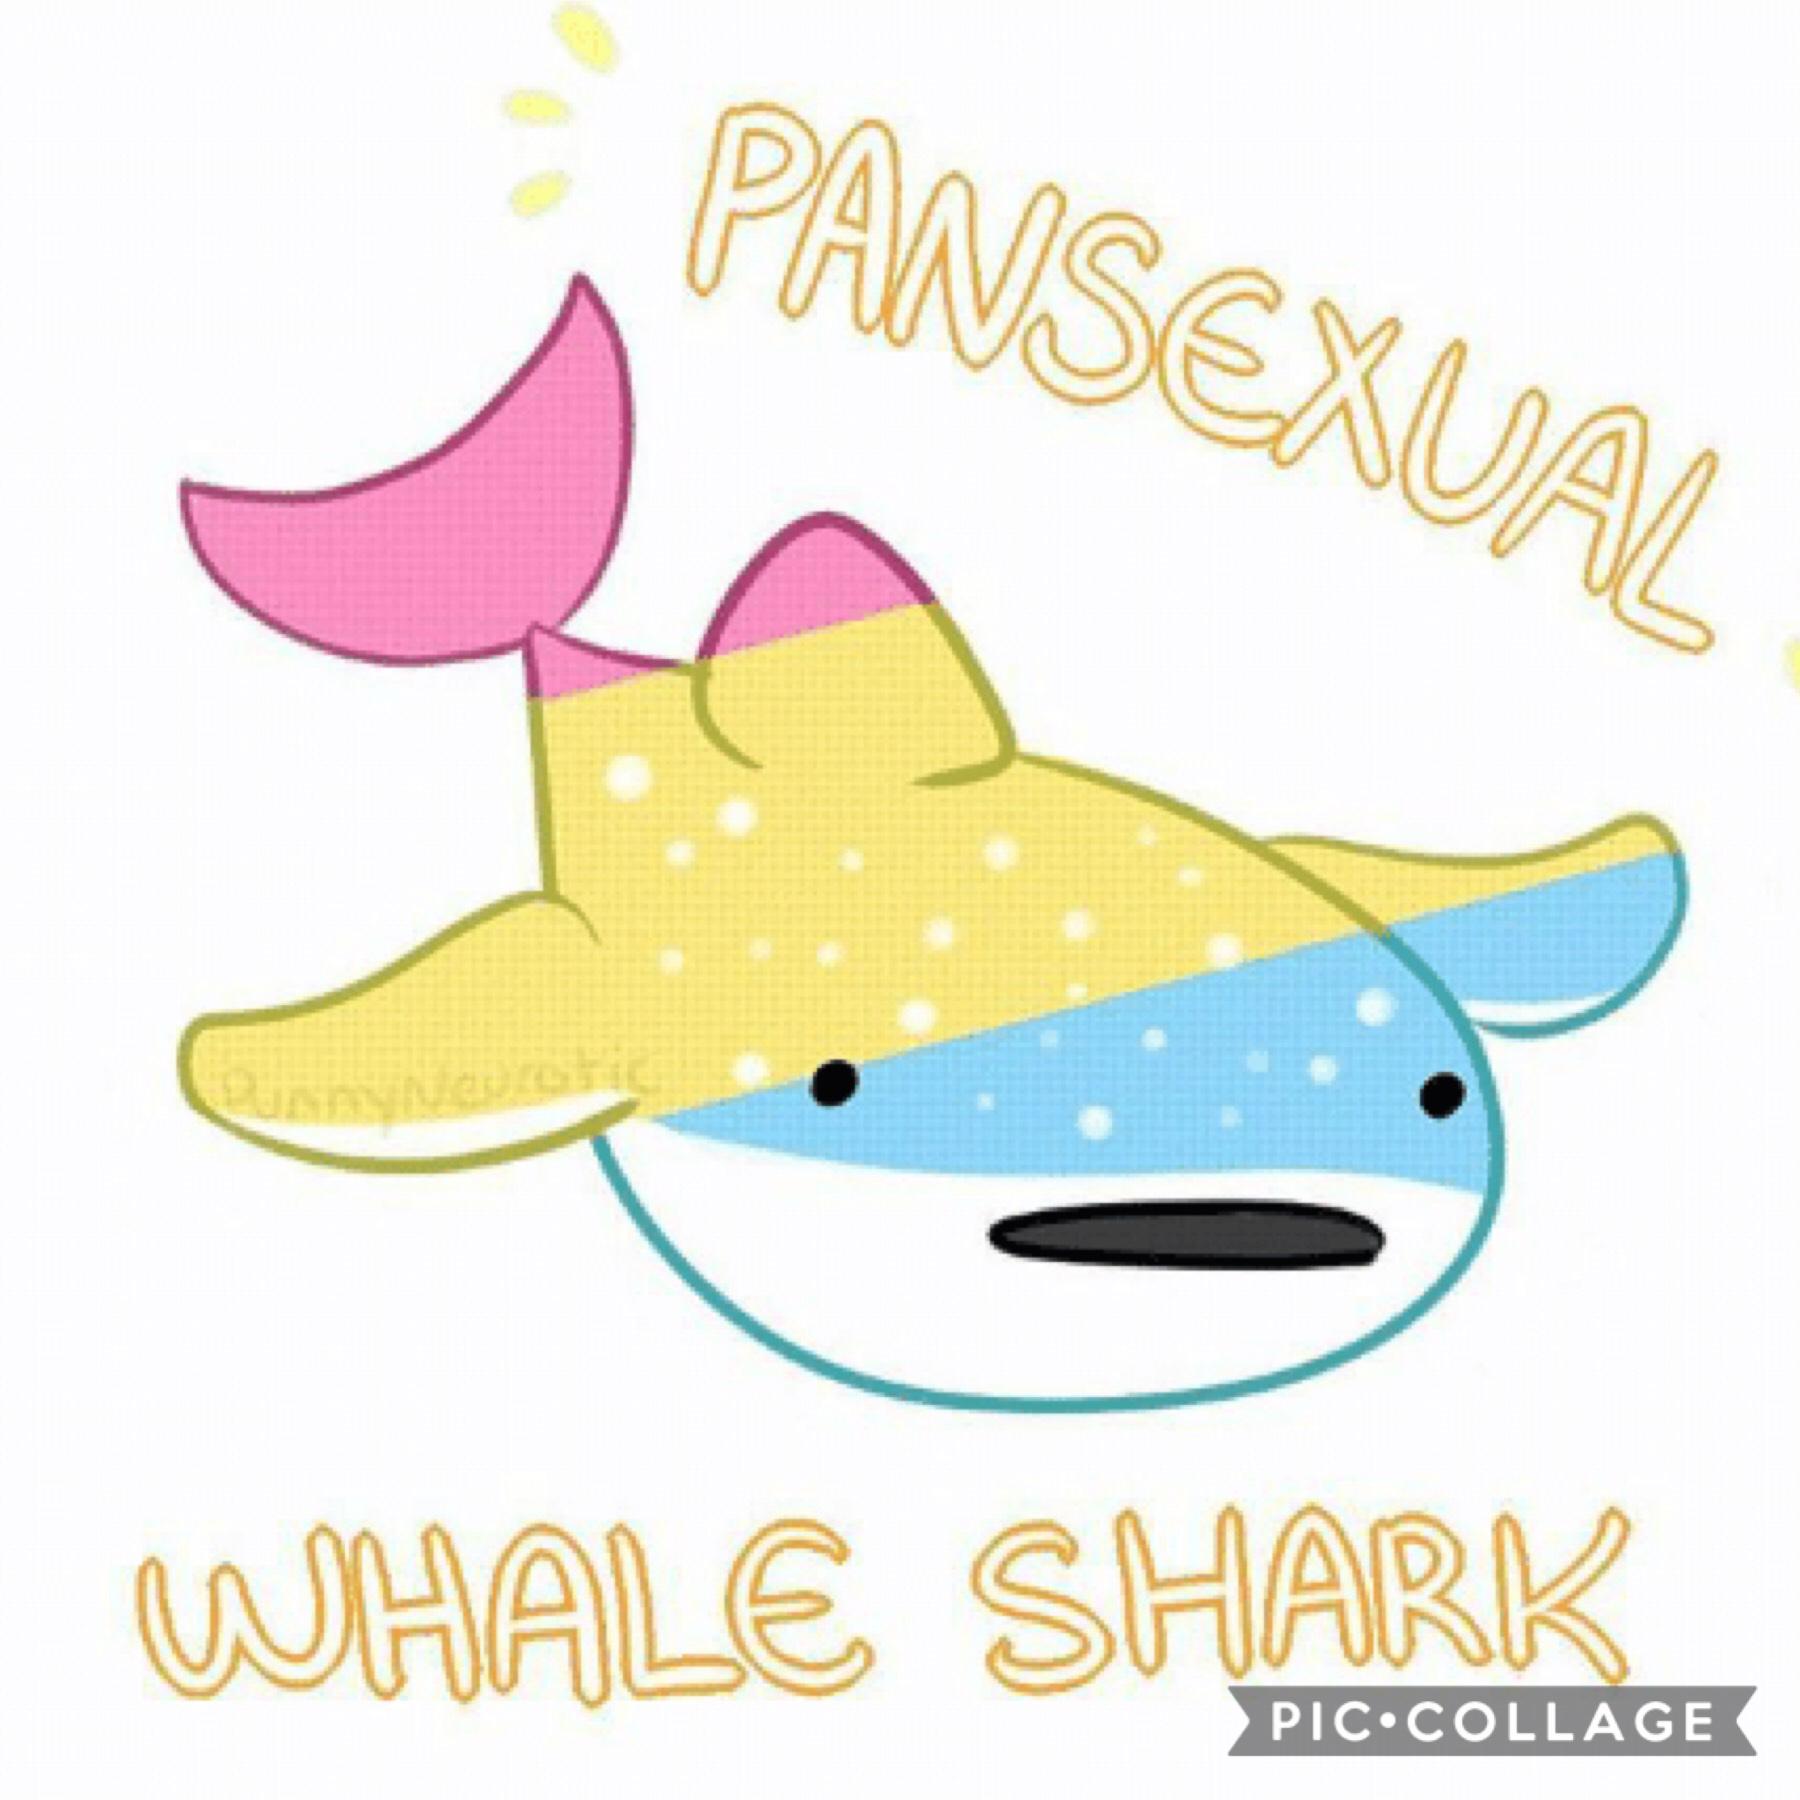 Pride Month: It's Pansexual Tuesday so :")) 